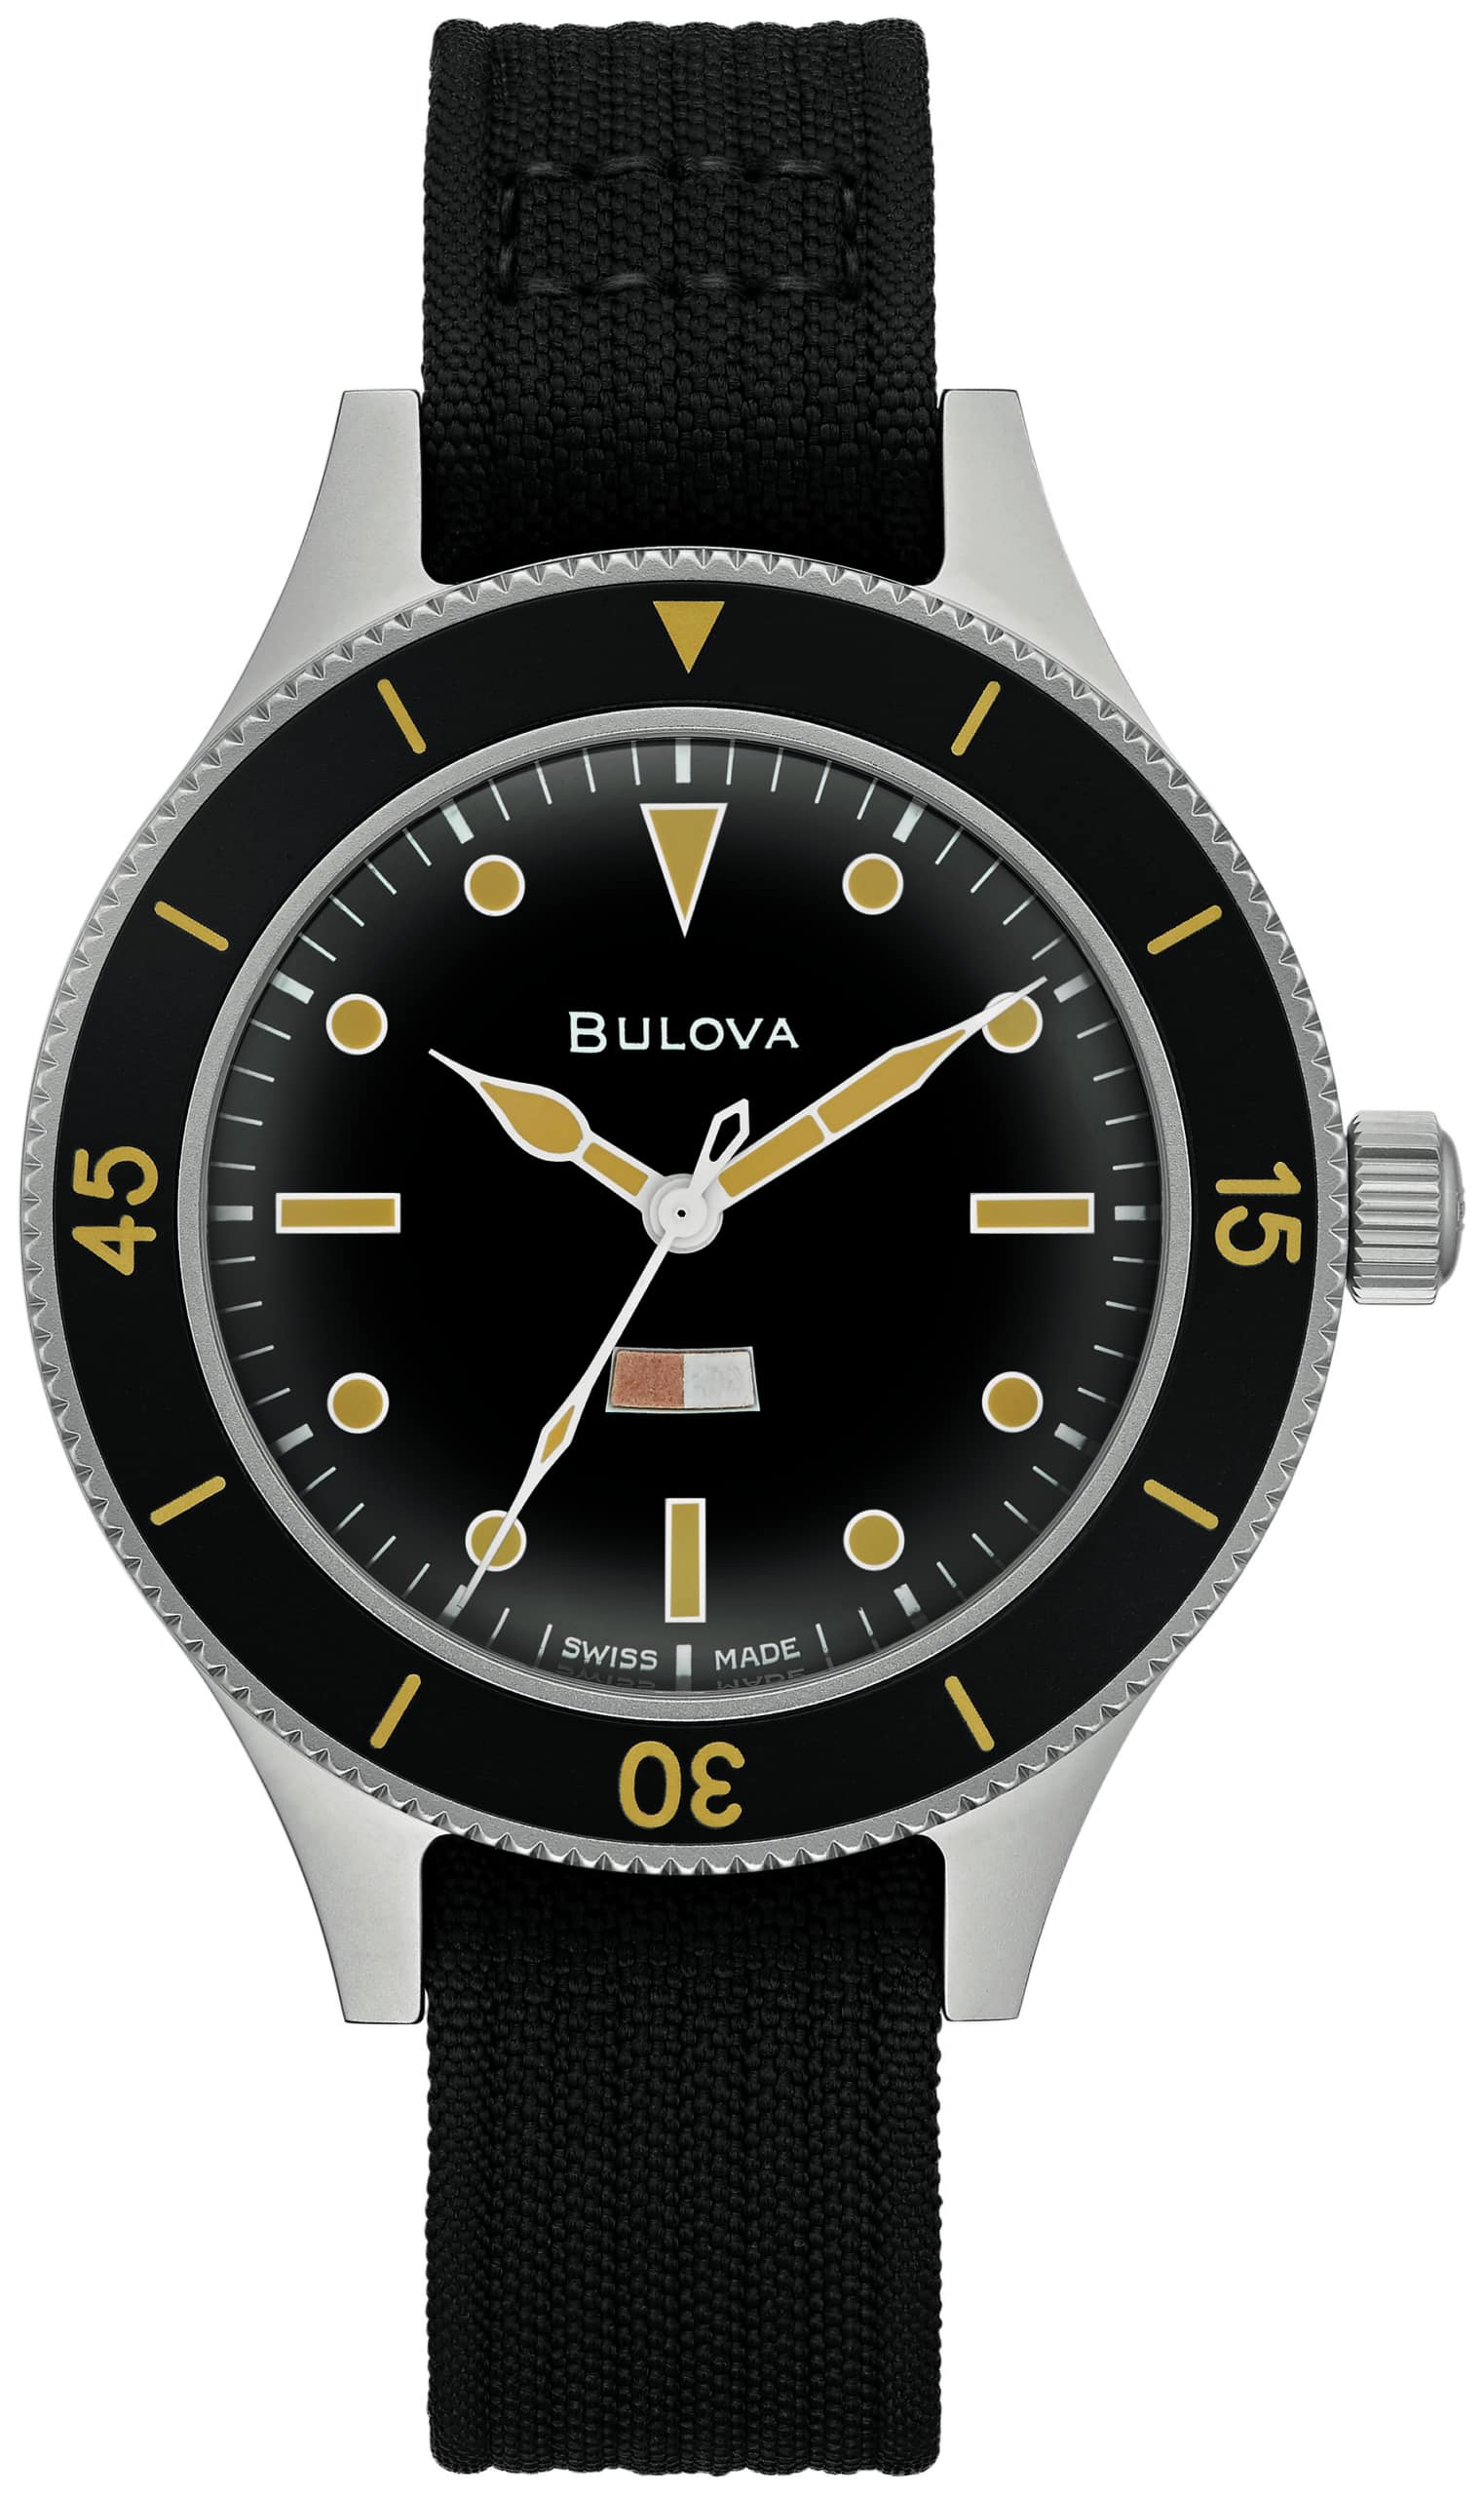 Bulova Brings Back The MIL-SHIPS With New W-2181